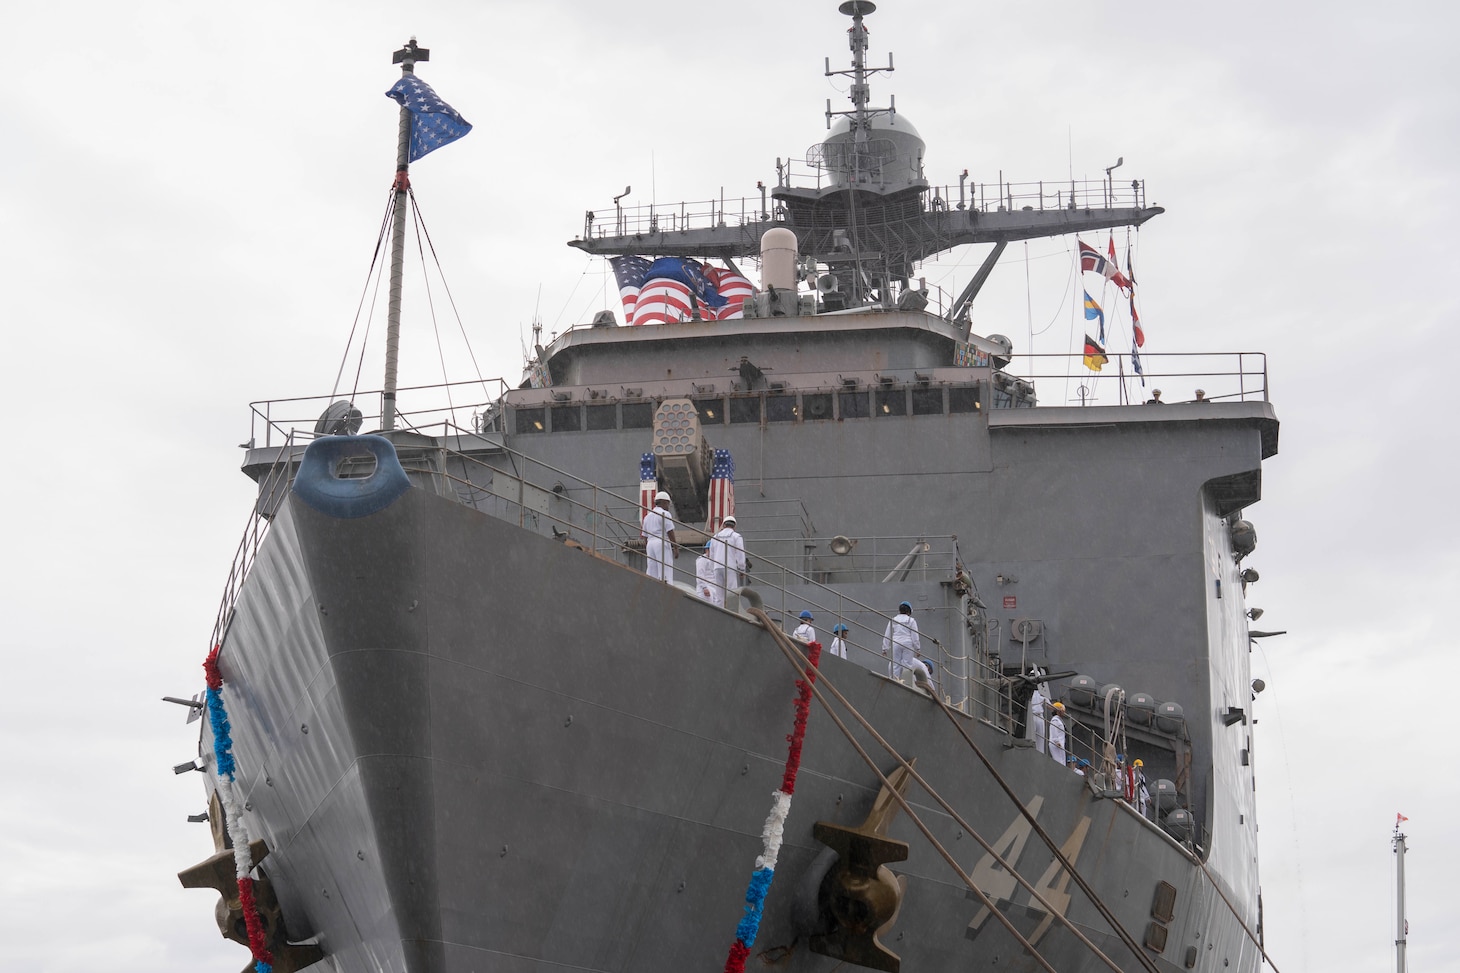 The Whidbey Island-class dock landing ship USS Gunston Hall (LSD 44) returned to Joint Expeditionary Base Little Creek-Fort Story after a deployment with the Kearsarge Amphibious Ready Group (ARG), Oct. 13.